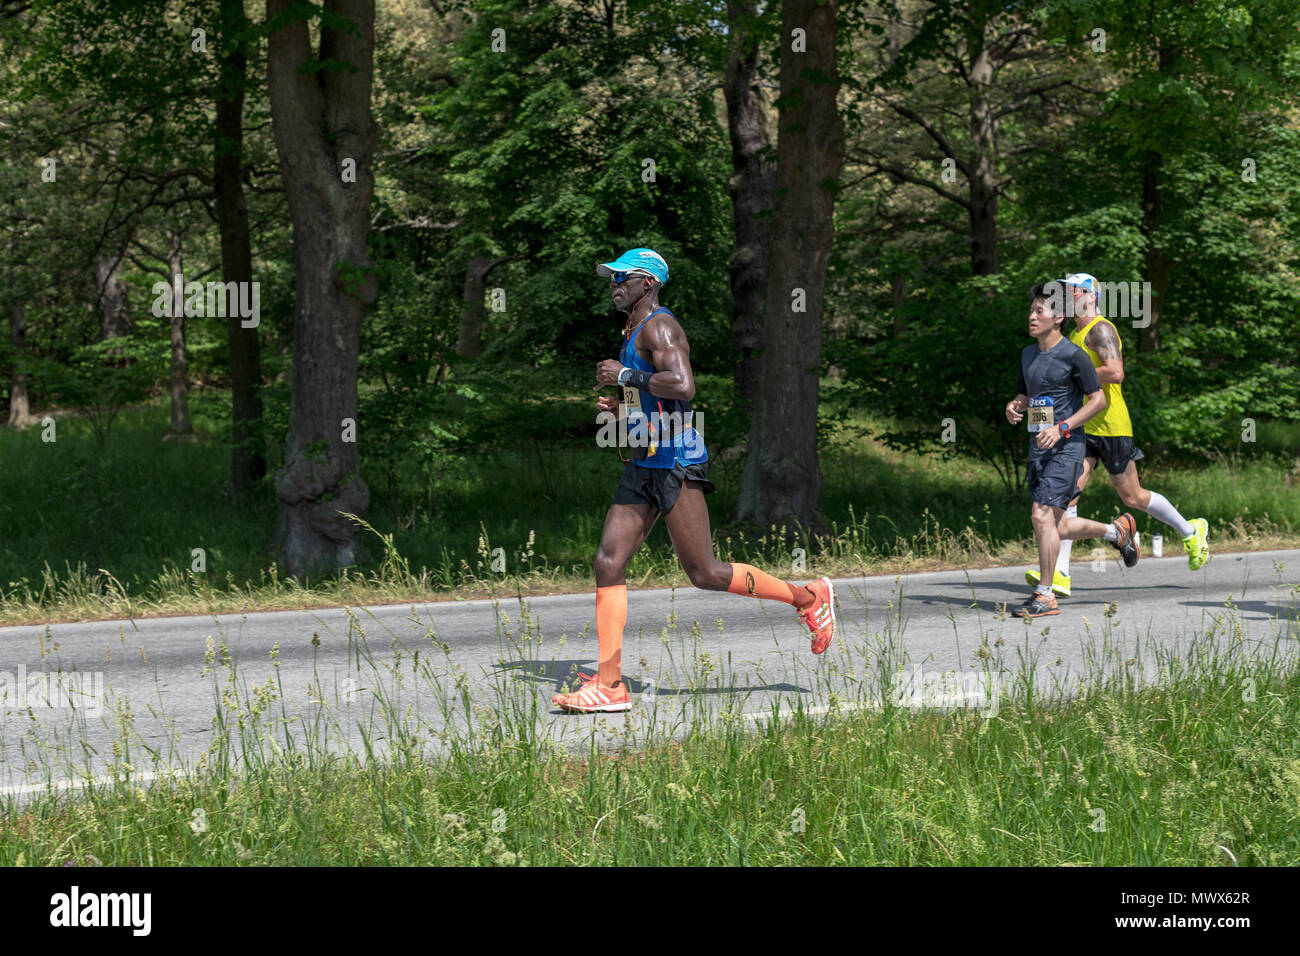 Stockholm, Sweden. 2nd June 2018.  Runners during the Stockholm Marathon 2018 in very hot conditions. Credit: Stefan Holm/Alamy Live News Stock Photo